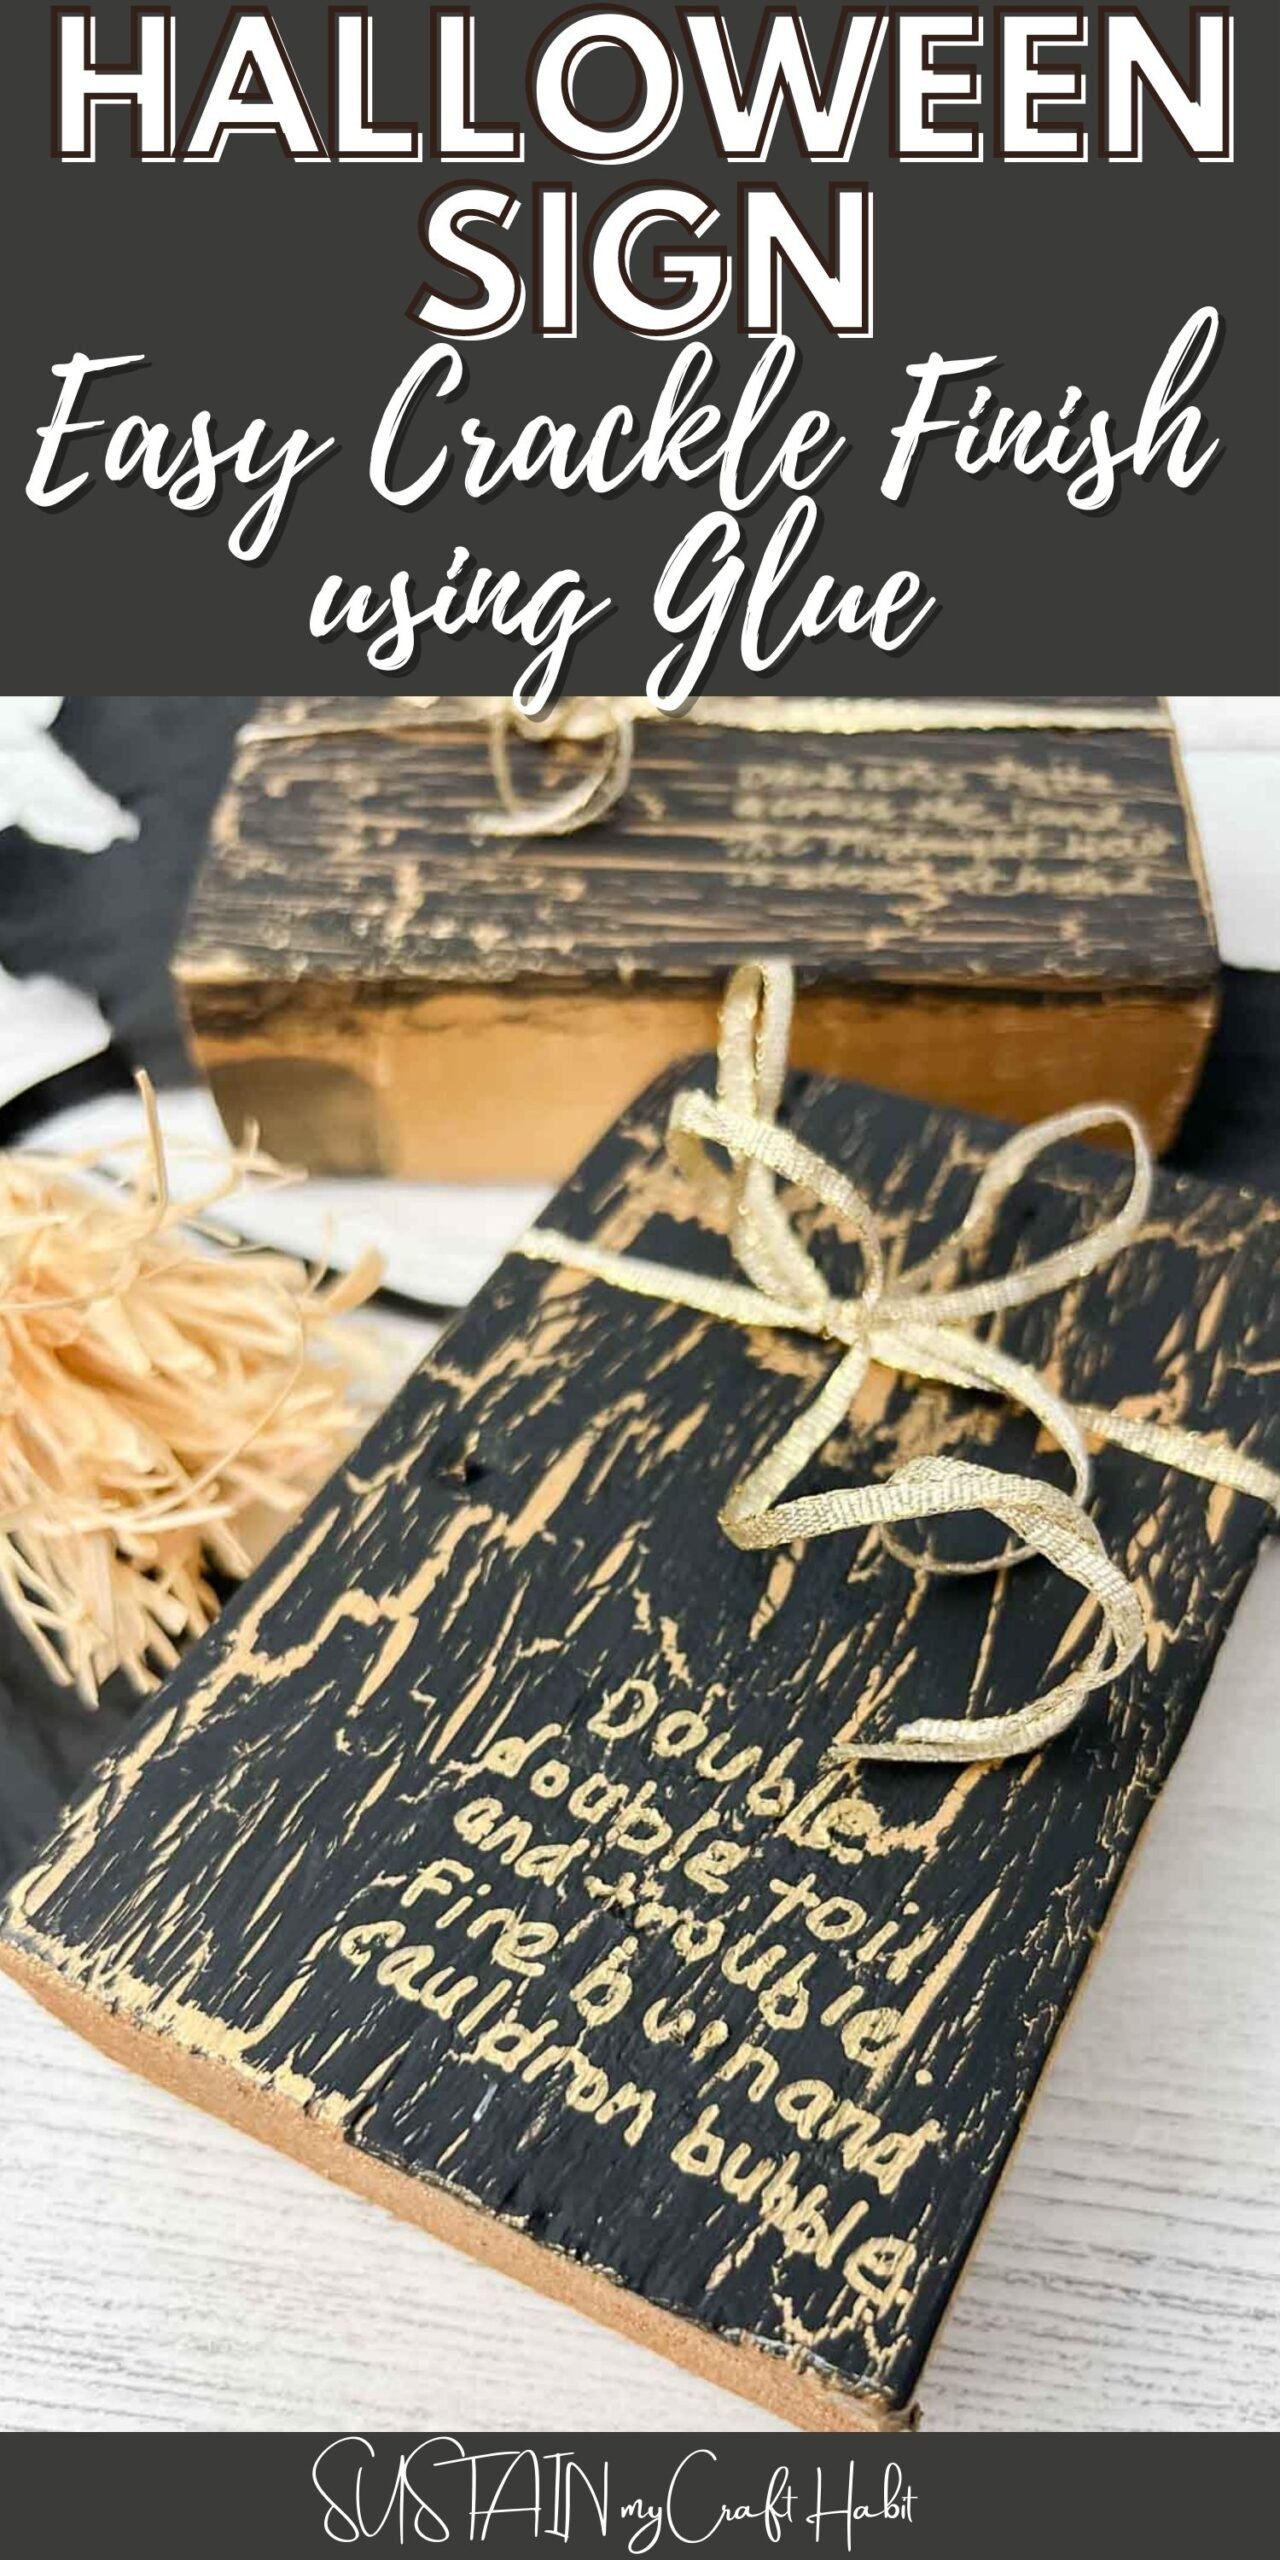 Image with completed craft and text overlay reading Halloween sign - Easy Crackle Finish using Glue